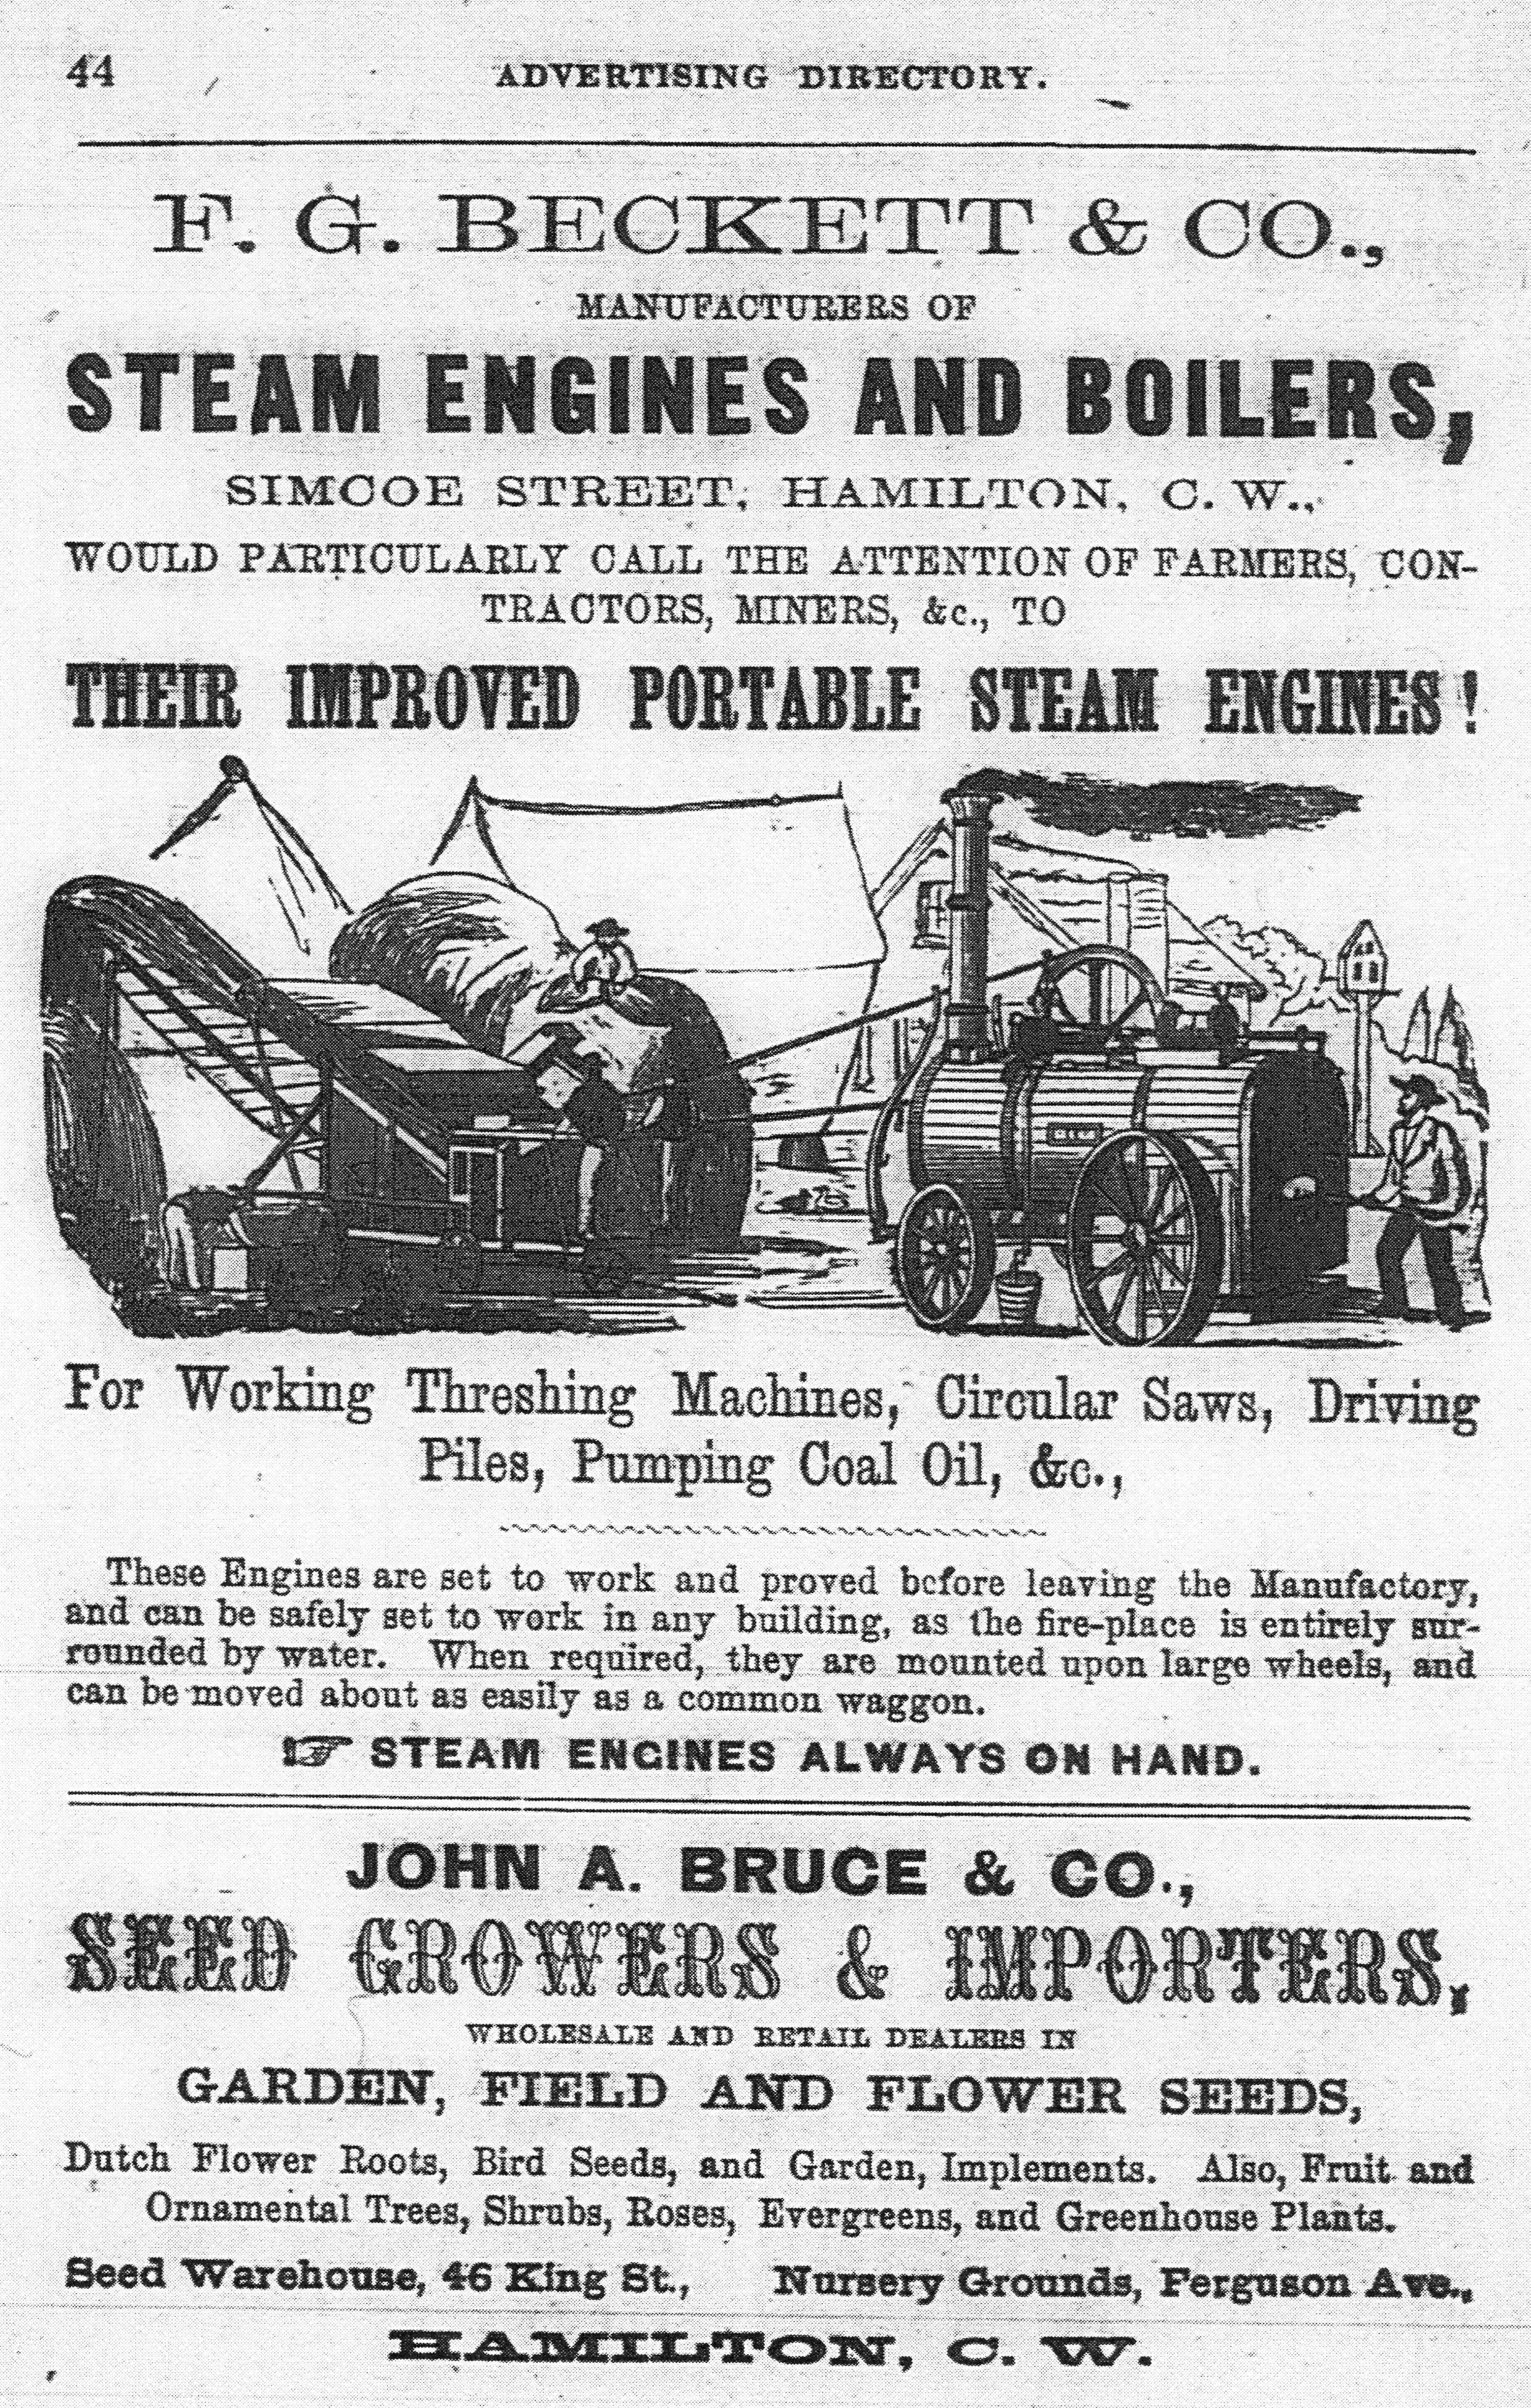 A printed advertisement for F.G. Beckett & Co. Steam Engines and Boilers featuring a drawing with new information on their "improved portable steam engines"